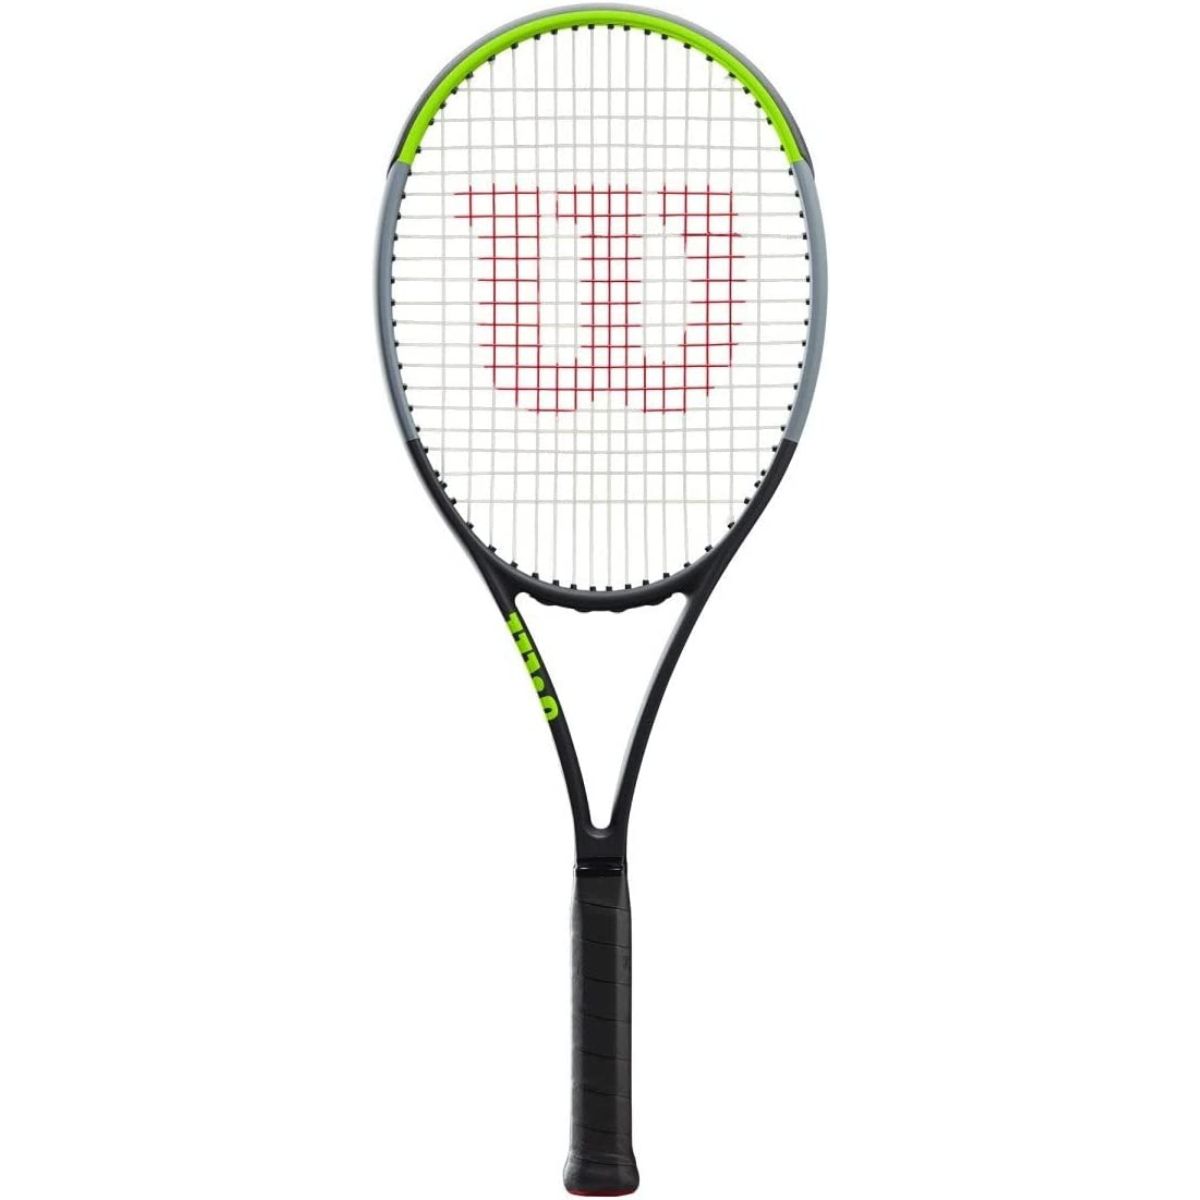 The Best Tennis Rackets for Tennis Elbow Options: Wilson Blade v7 98 